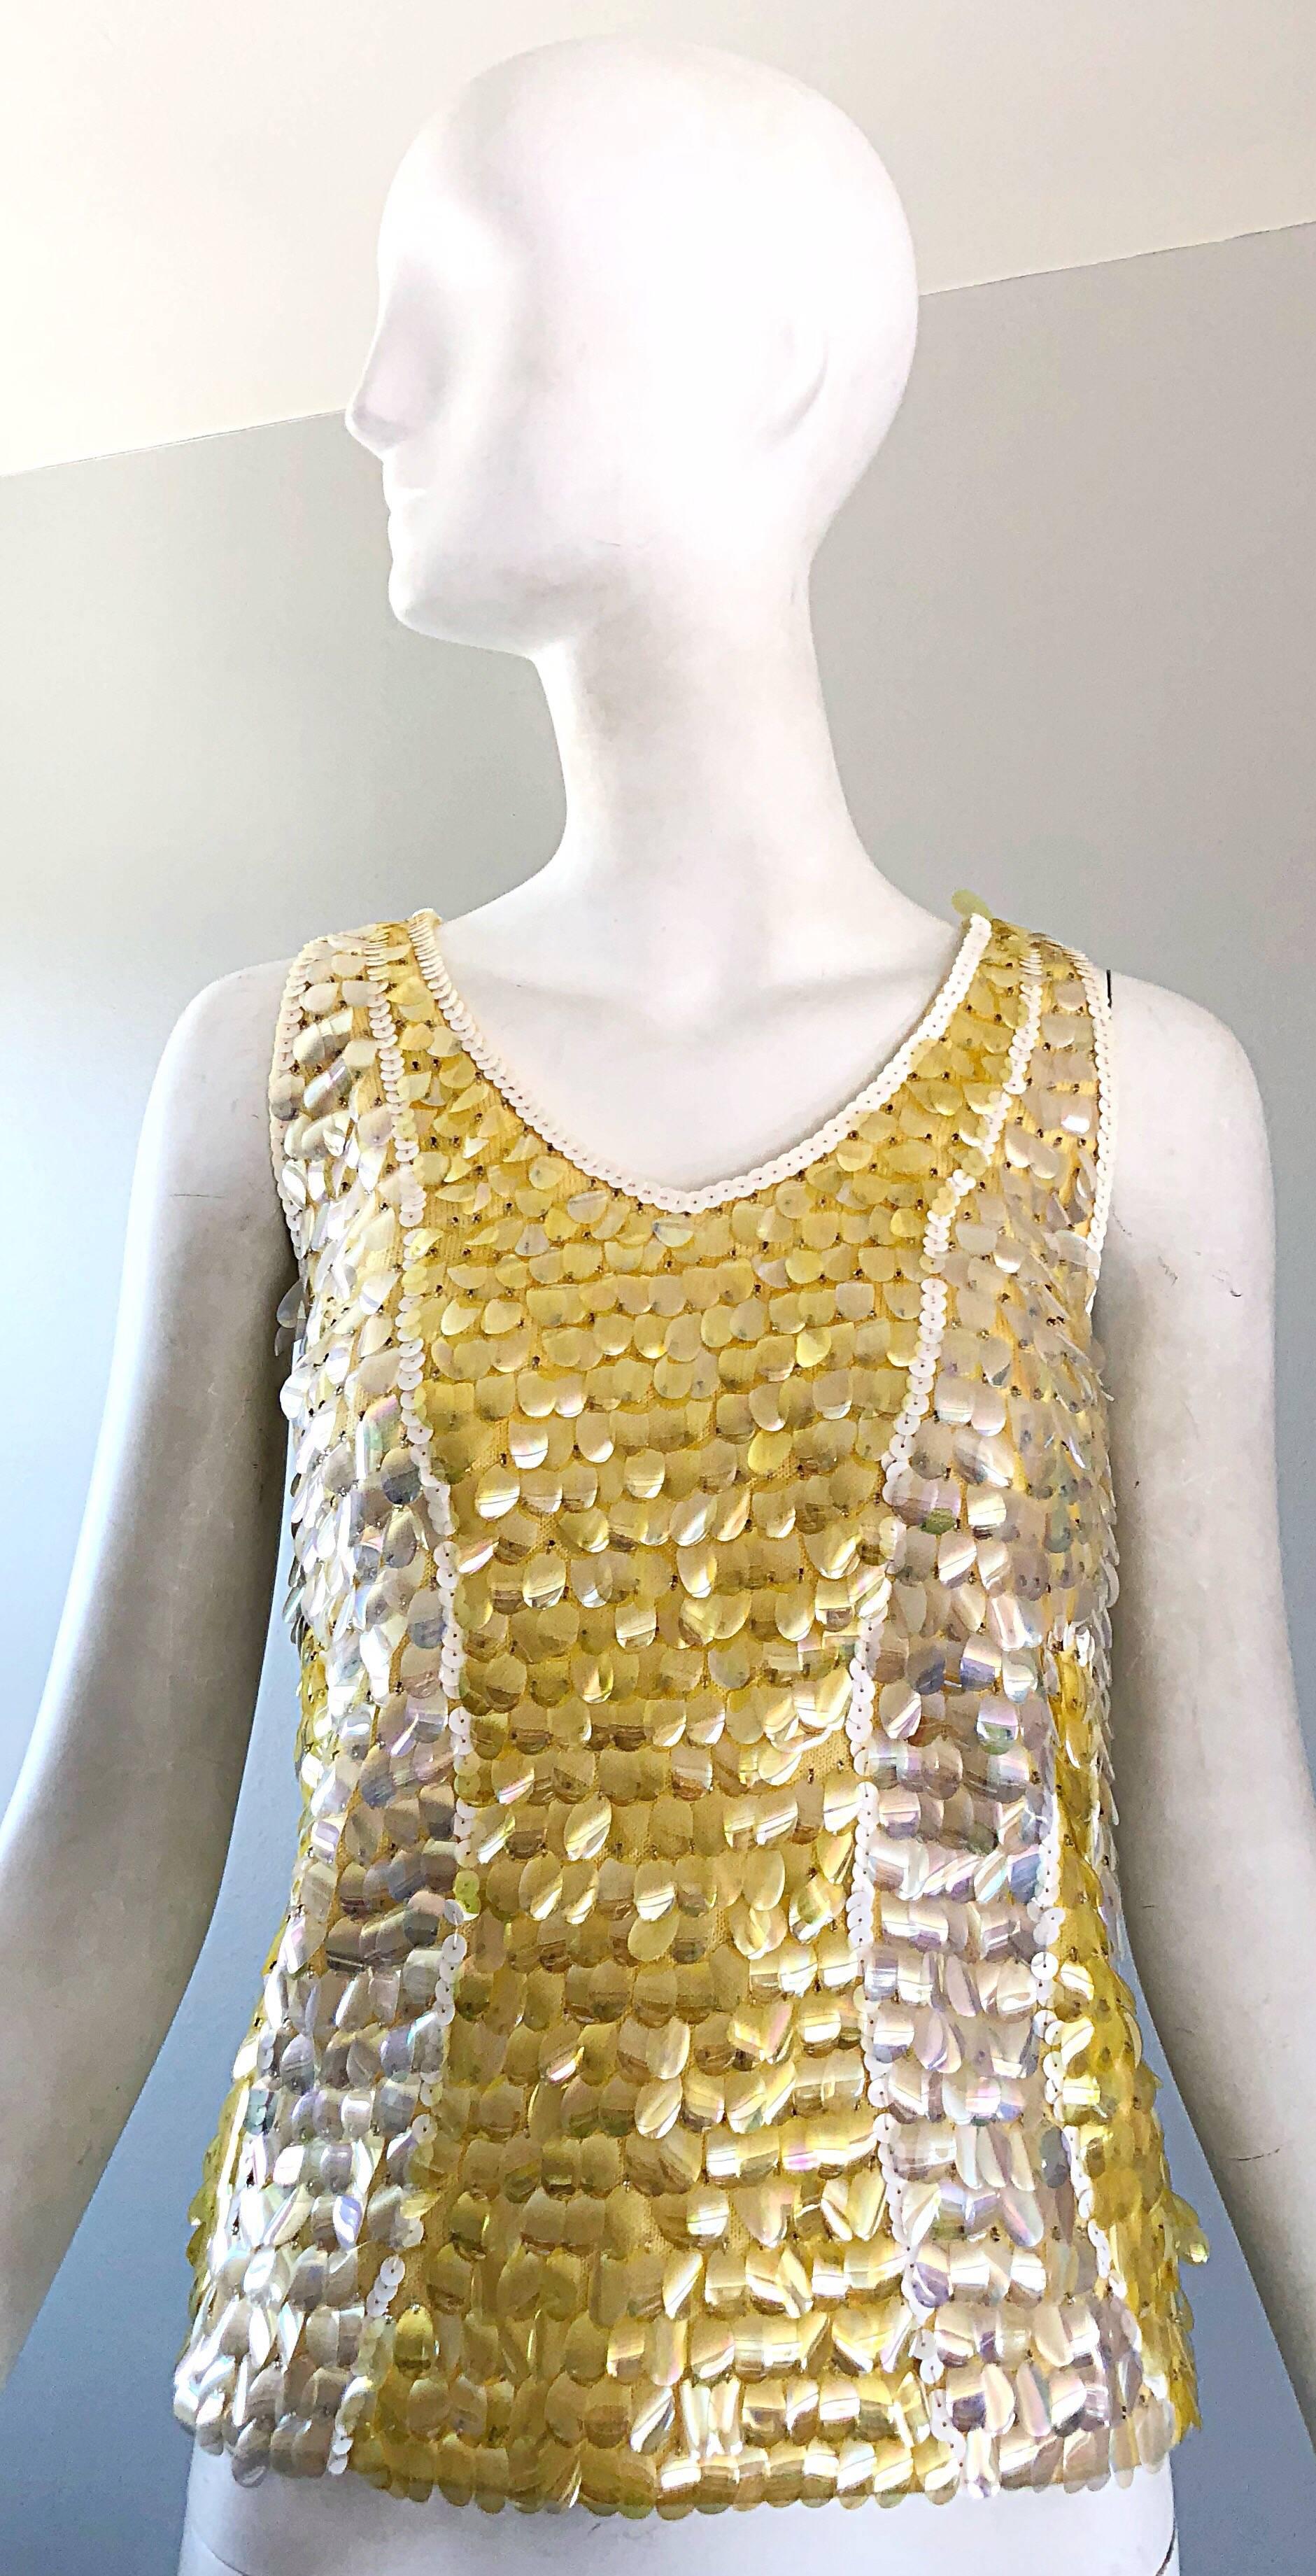 Chic vintage 1960s yellow, white and clear paillettes and sequin encrusted sleeveless lamb's wool sweater top! Features hundreds of hand-sewn sequins and paillettes throughout. Super soft luxurious lamb's wool, and fully lined in rayon. Full metal